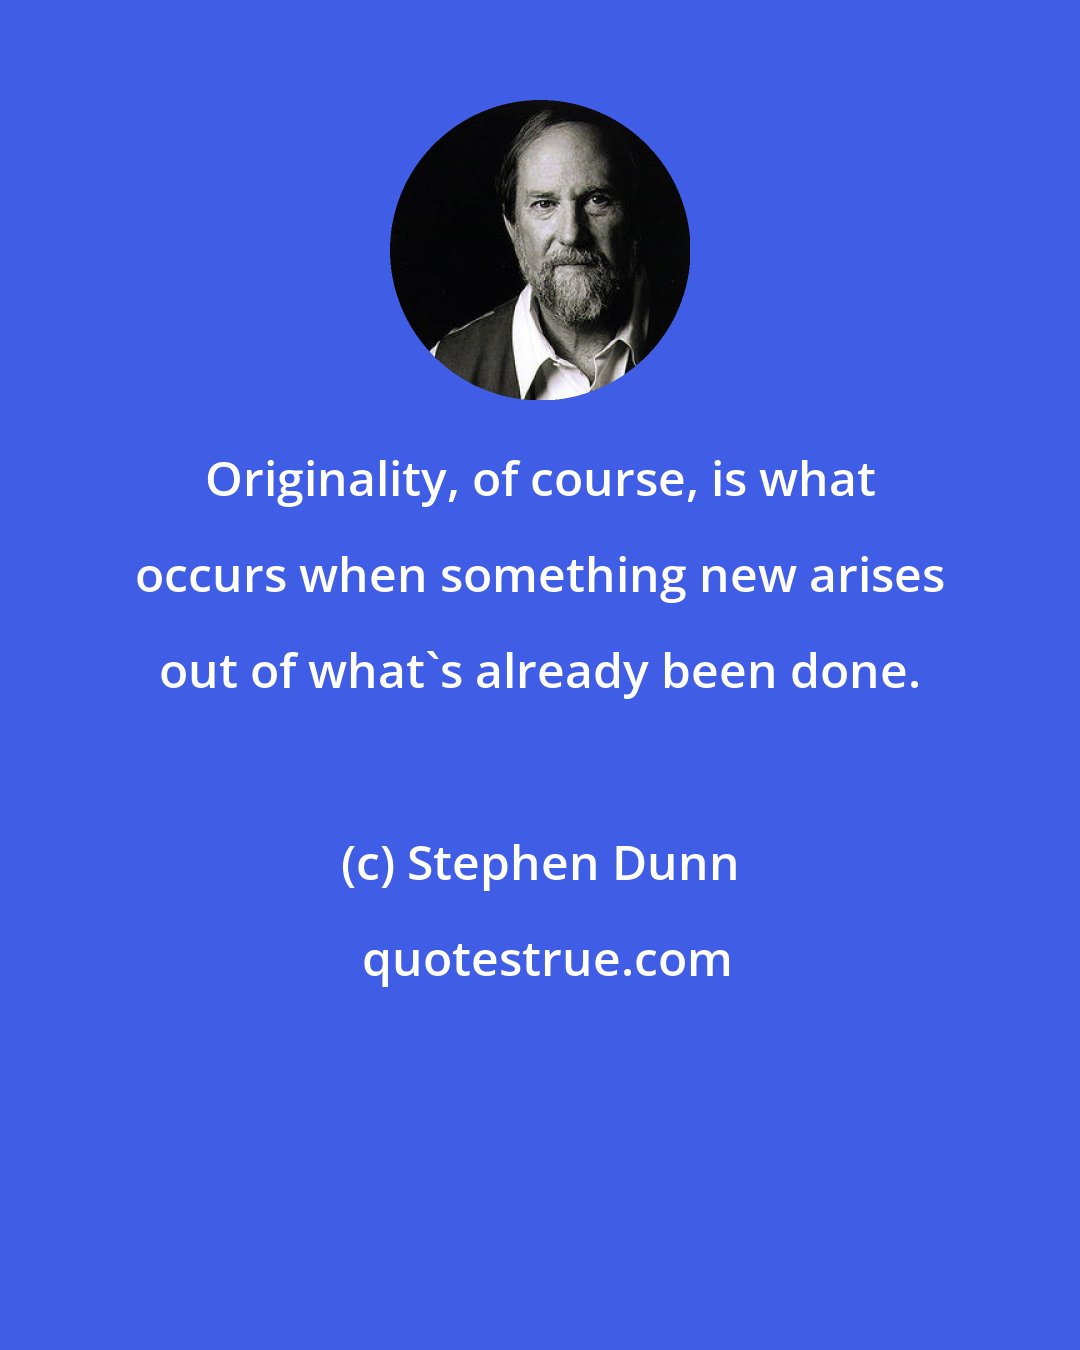 Stephen Dunn: Originality, of course, is what occurs when something new arises out of what's already been done.